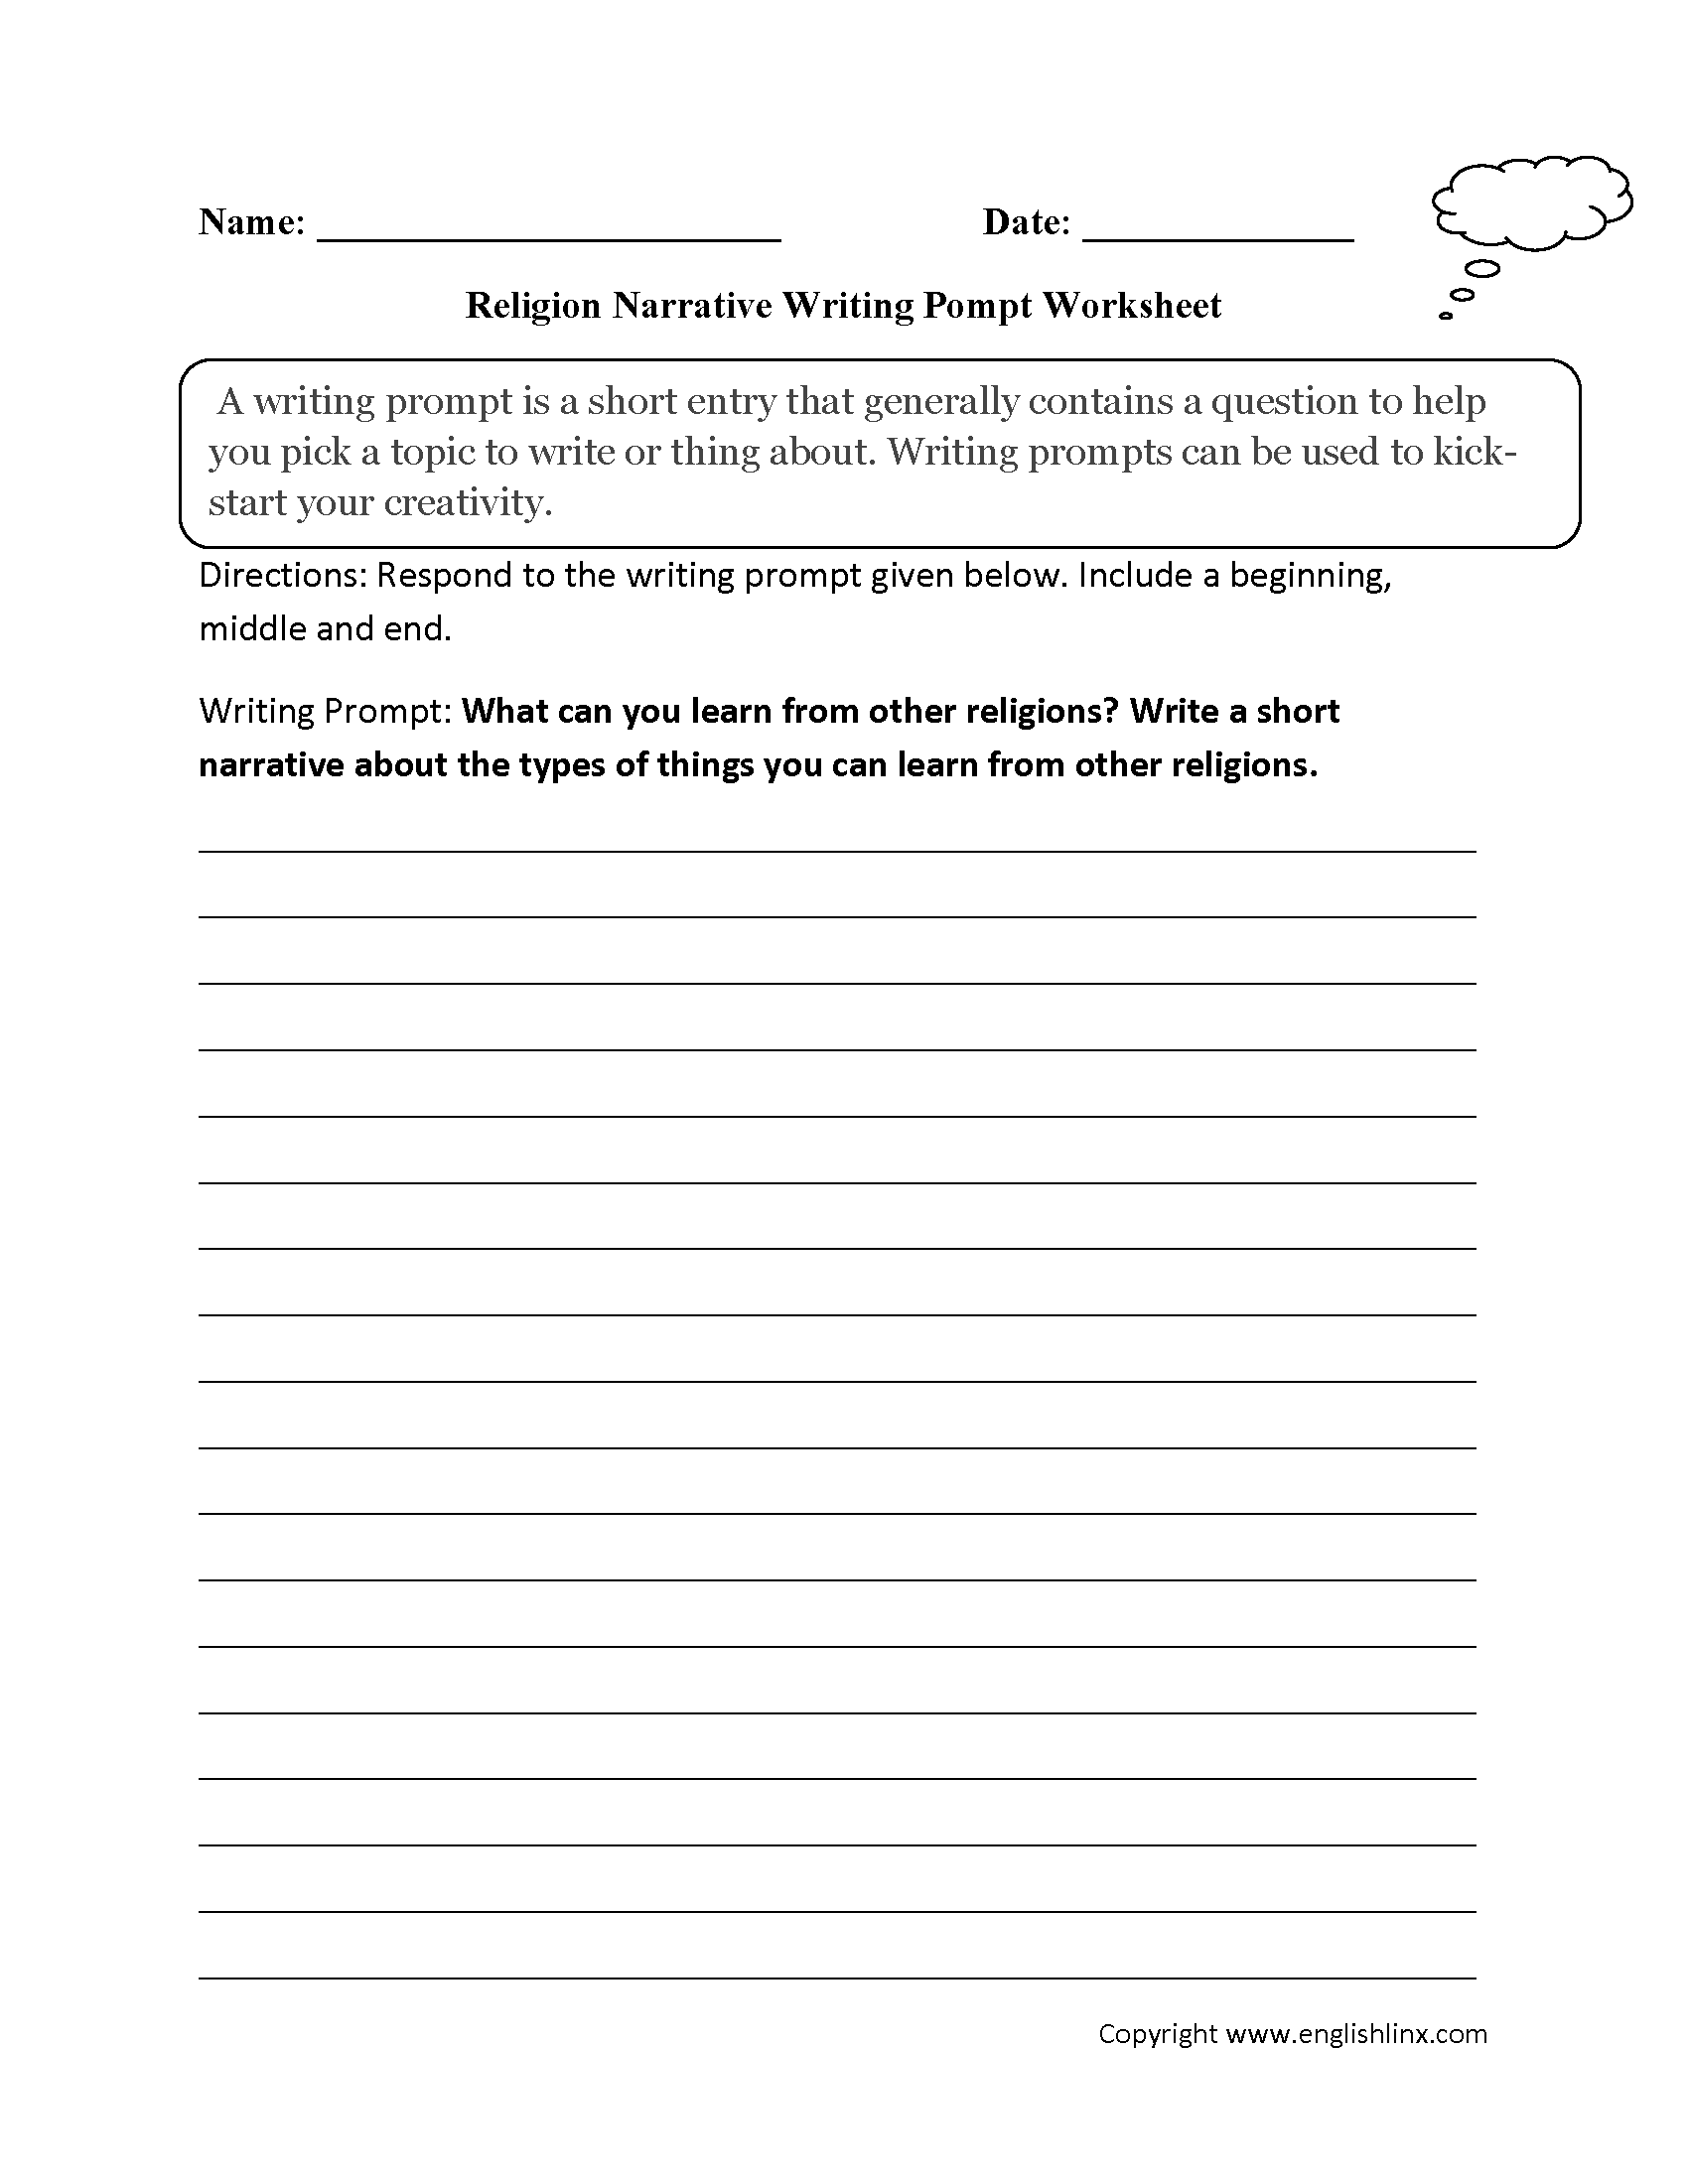 Learn from Religion Narrative Writing Prompt Worksheet